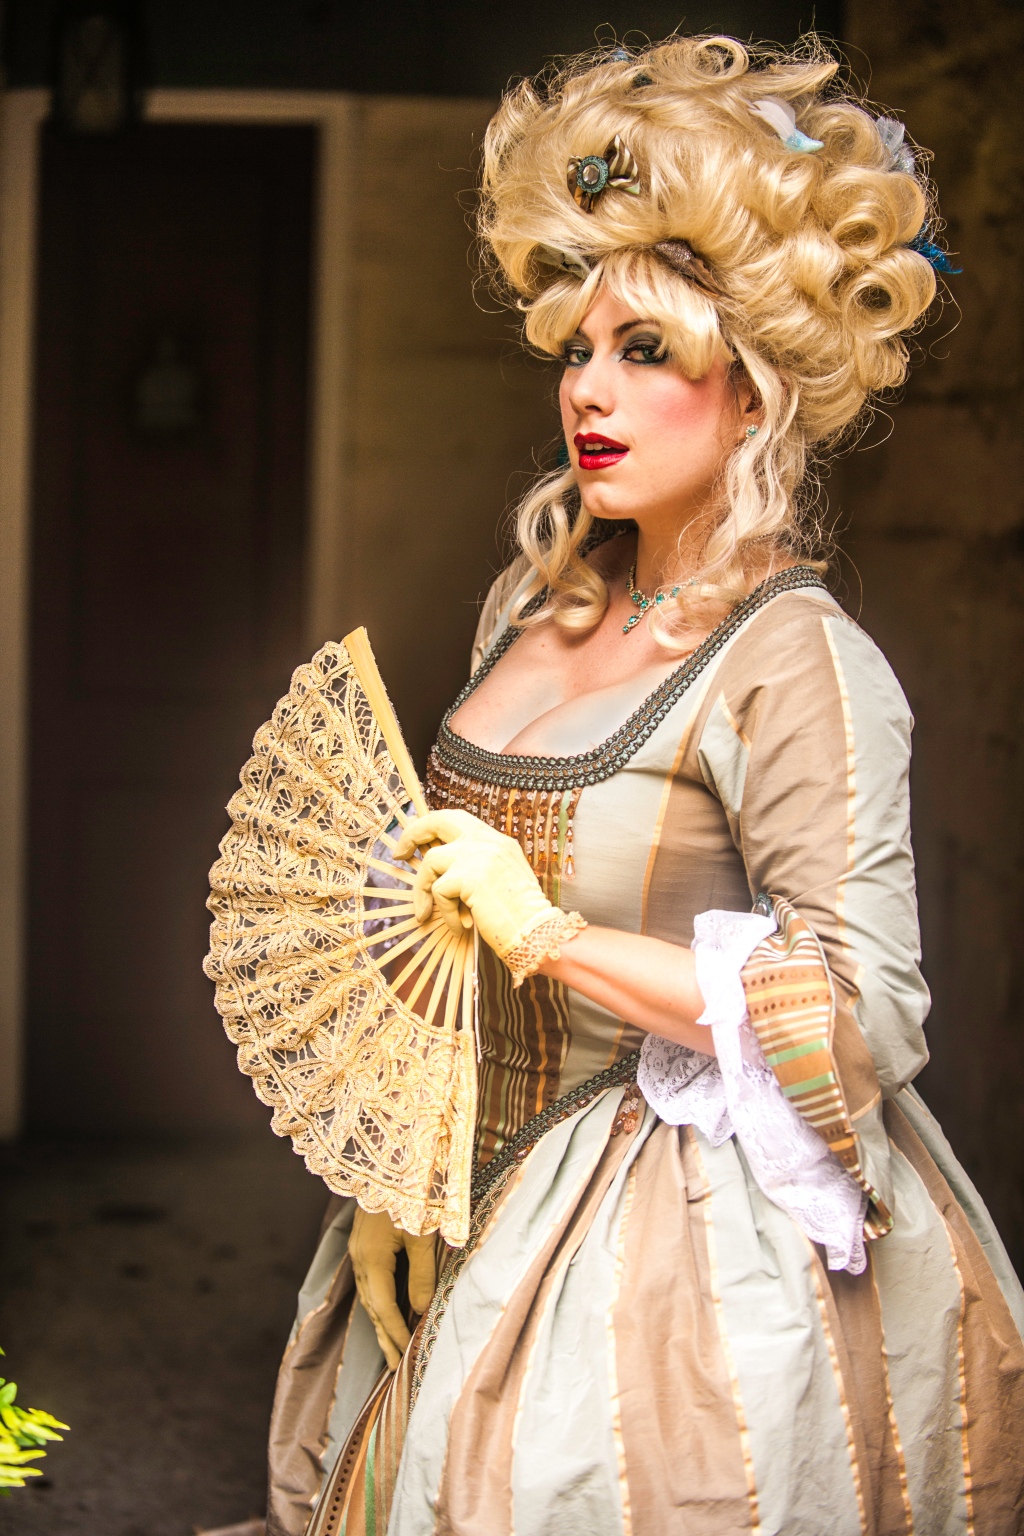 COSPLAYER IN FOCUS: AN INTERVIEW WITH FREYA FOLKVANGR